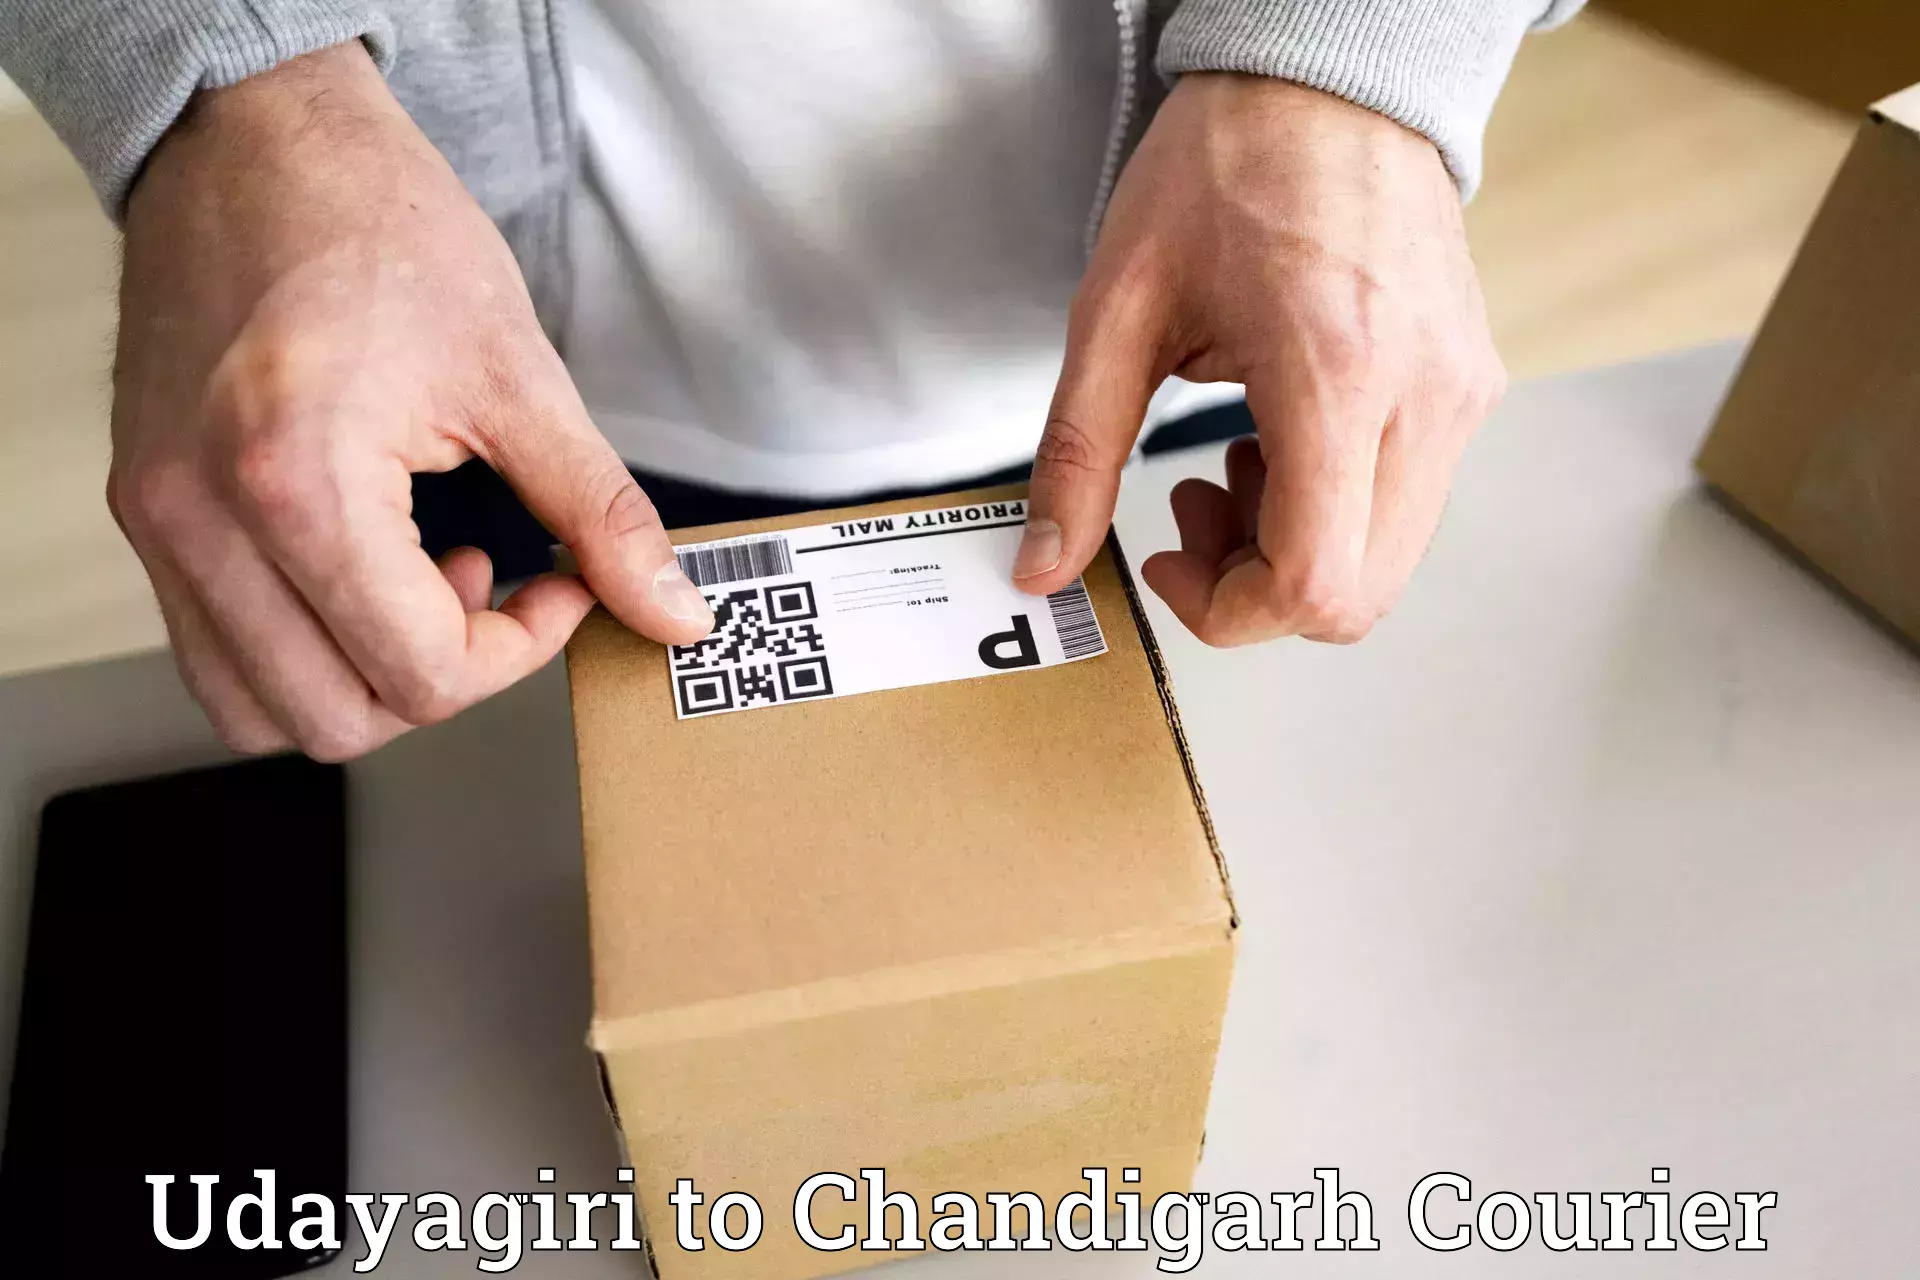 Easy access courier services Udayagiri to Chandigarh